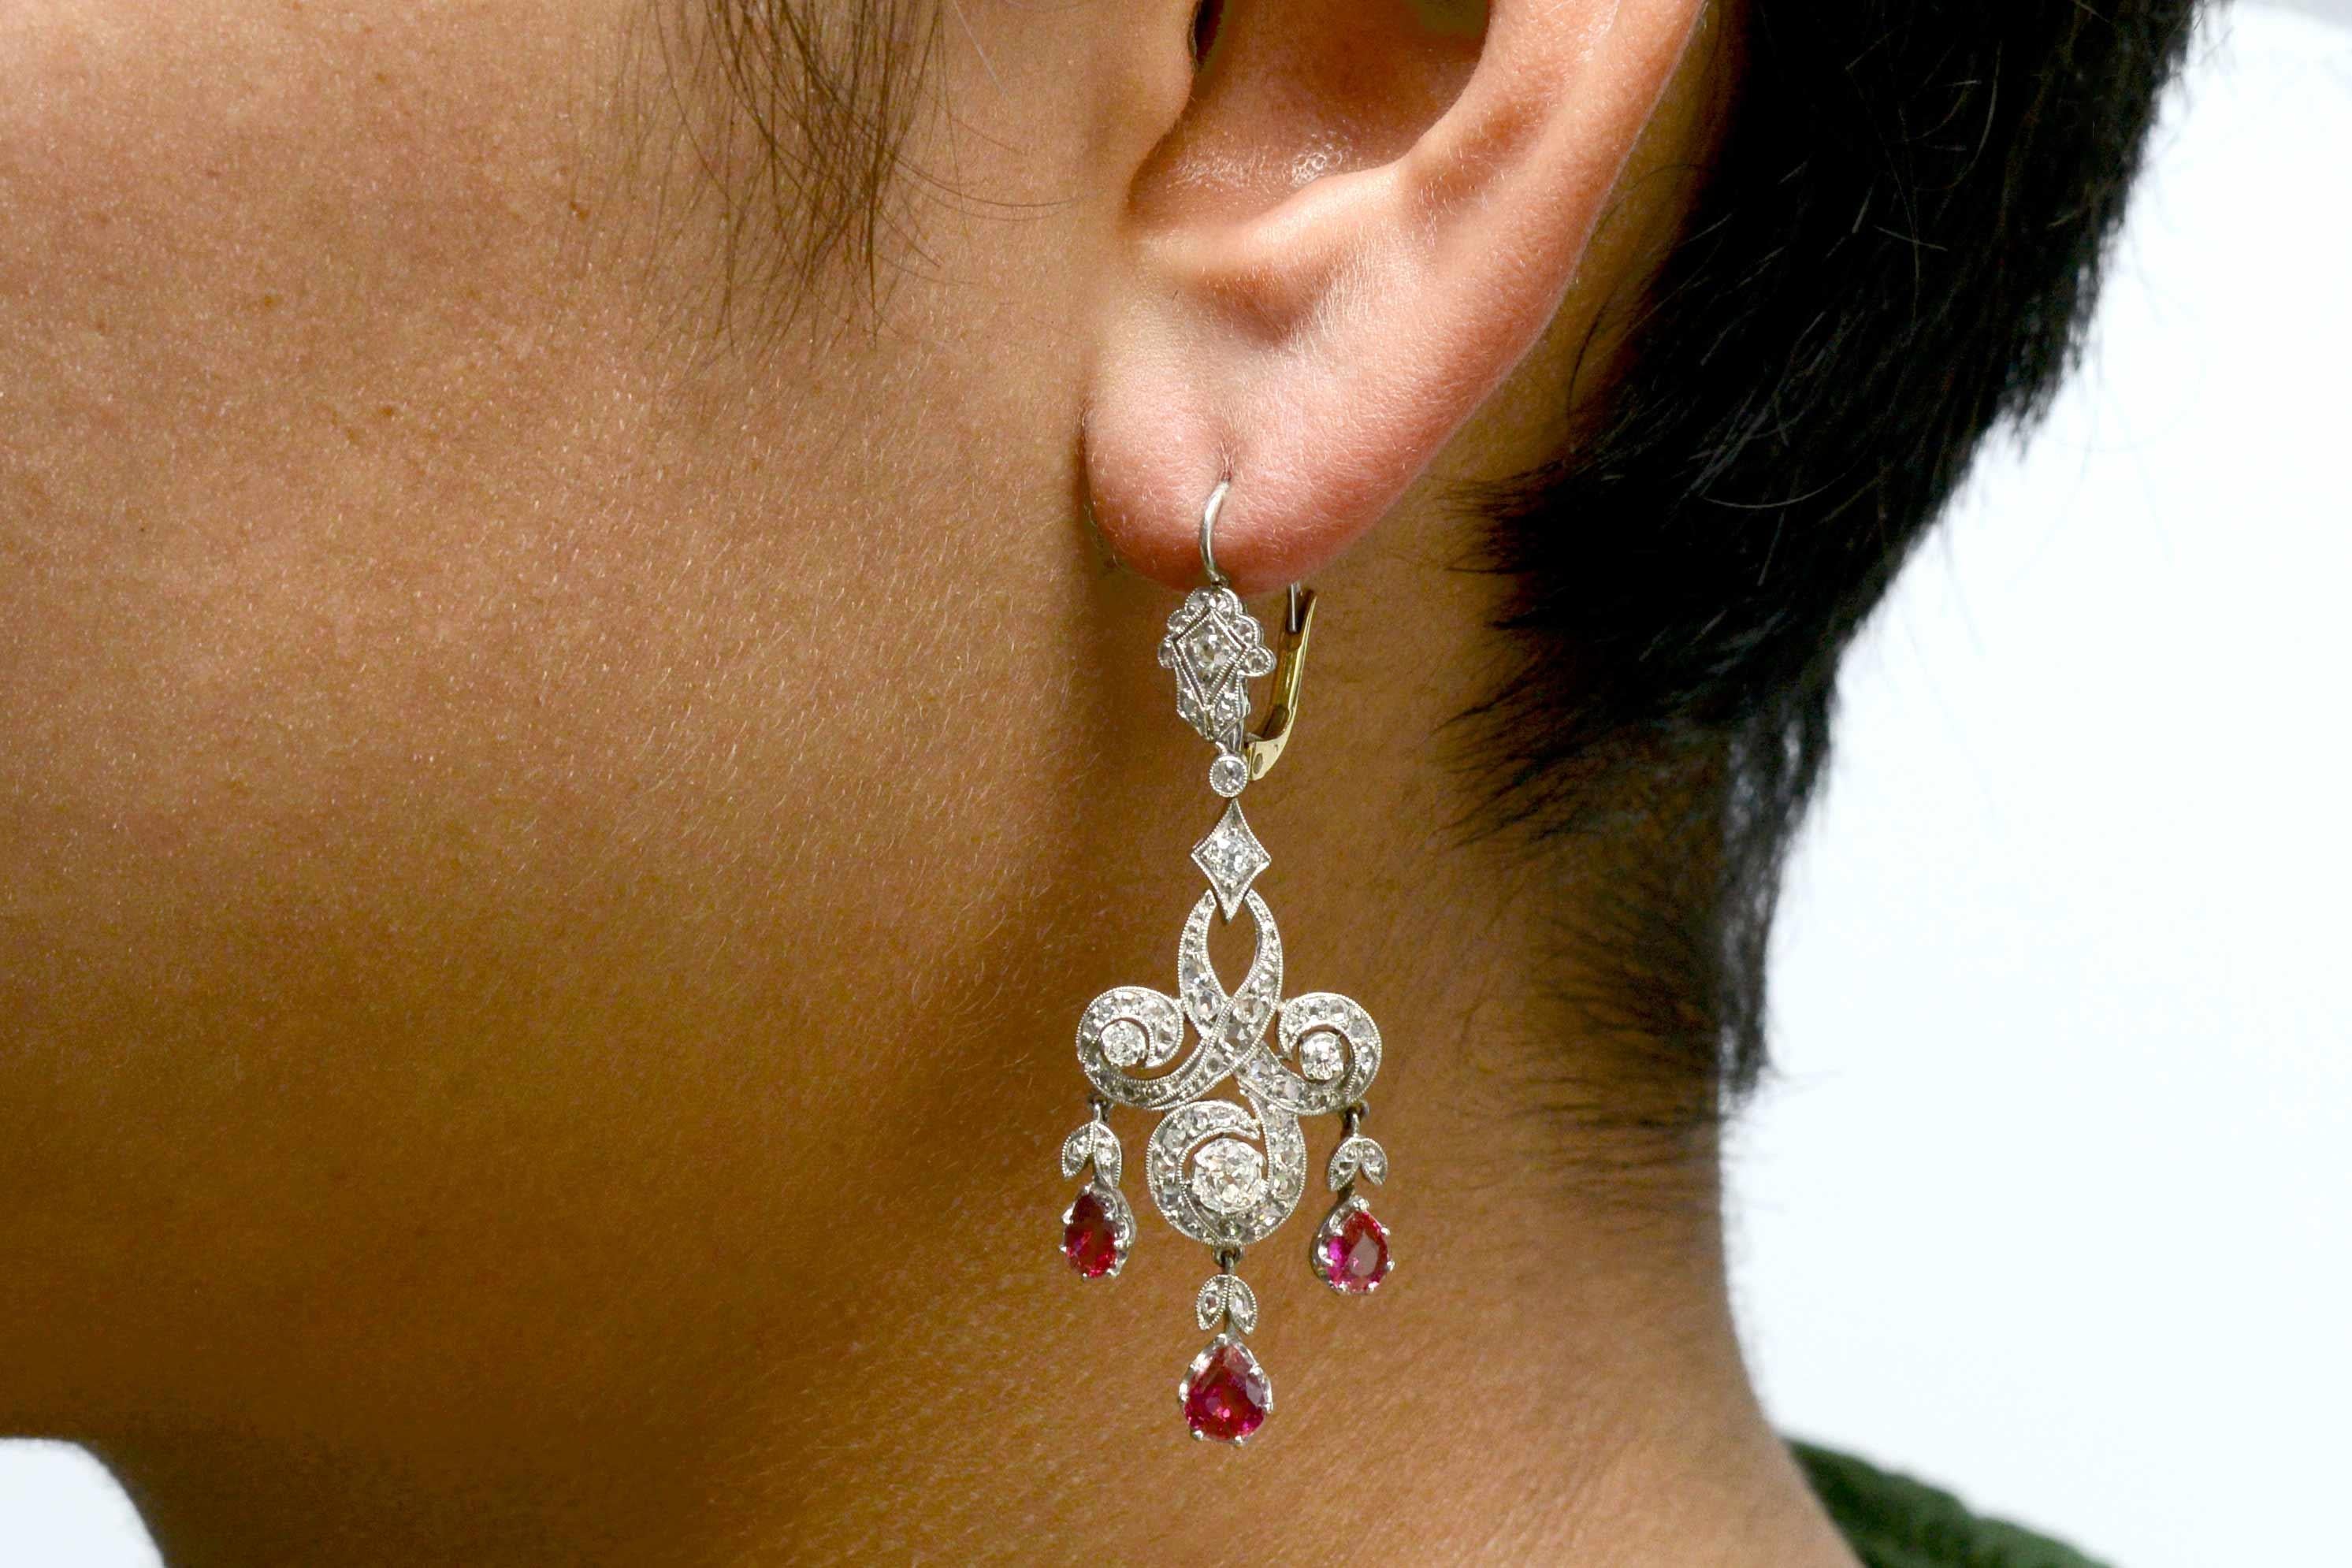 A pair of elegant revivalist Edwardian ruby and diamond chandelier earrings with an awesome 2